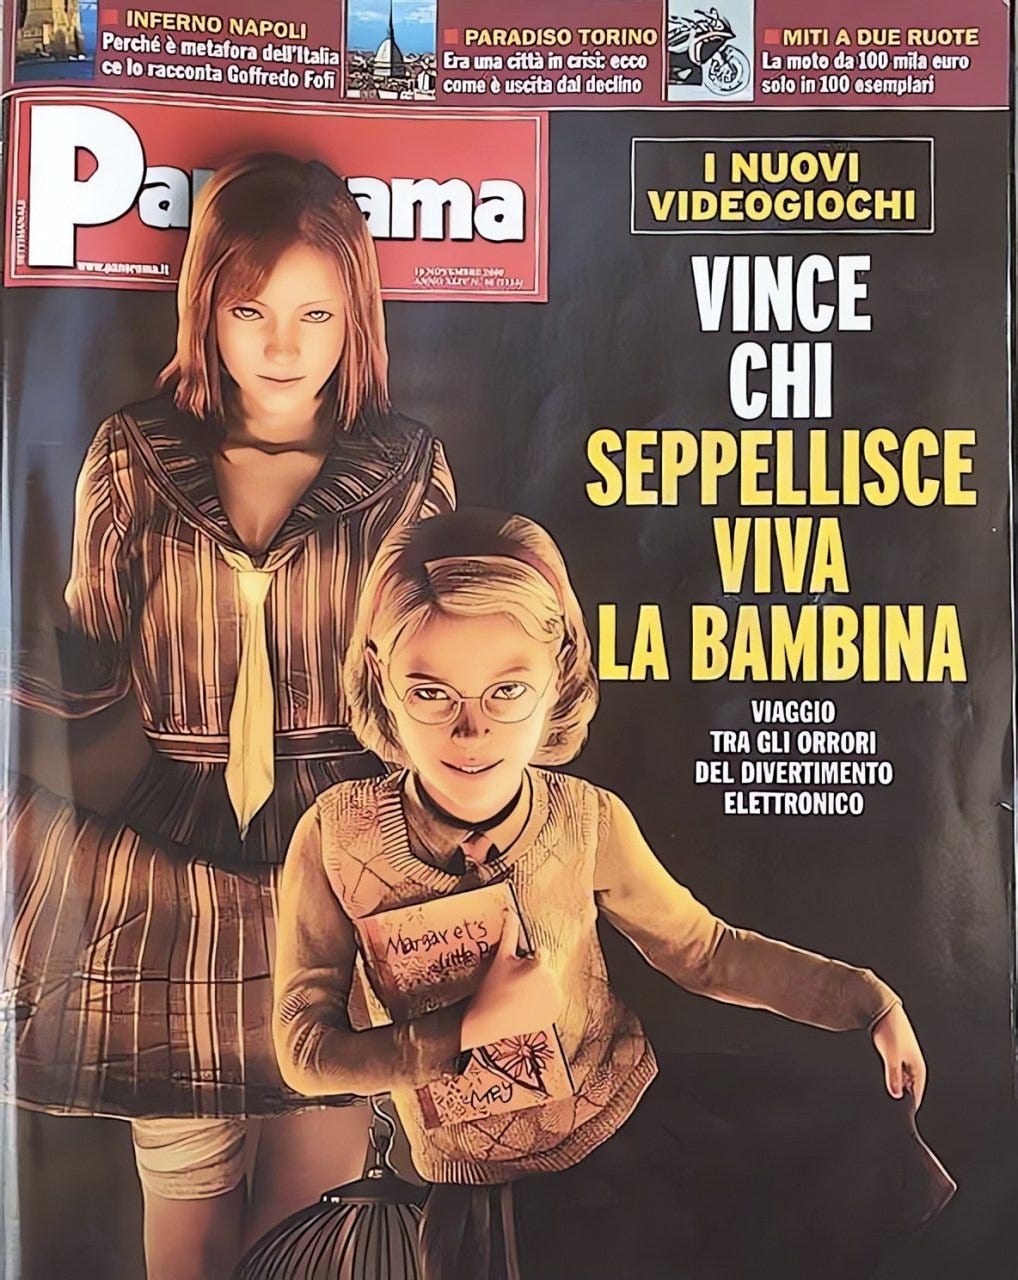 A picture of the front page of the Italian publication "Panorama" featuring pictures of Meg and Diana. The title, translated, wins: HE WHO BURIES THE LITTLE GIRL WINS